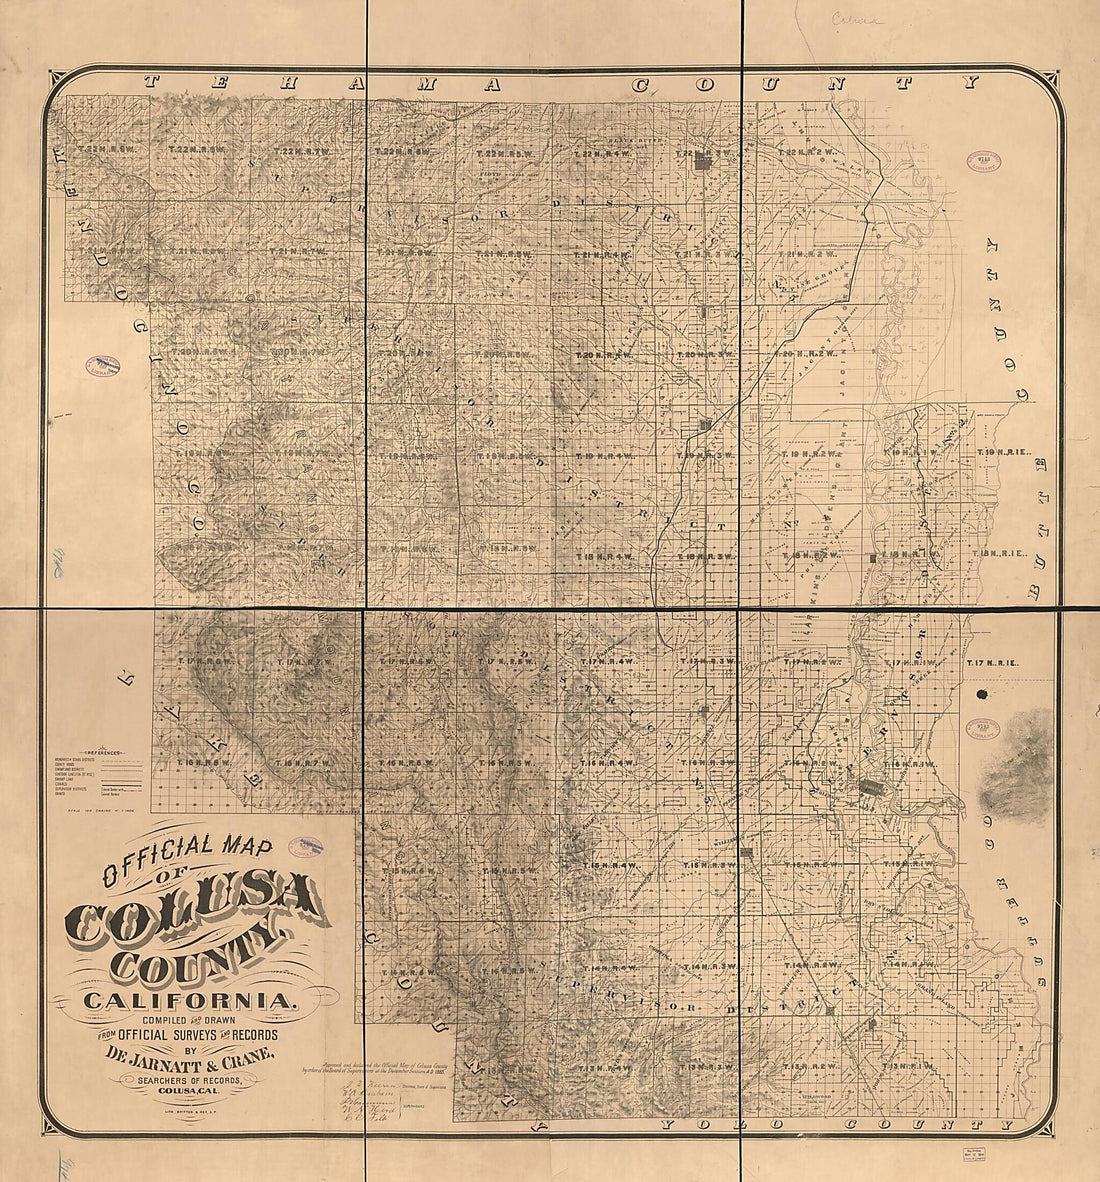 This old map of Official Map of Colusa County, California. : Compiled and Drawn from Official Surveys and Records from 1885 was created by  Britton &amp; Rey,  De Jarnatt &amp; Crane in 1885